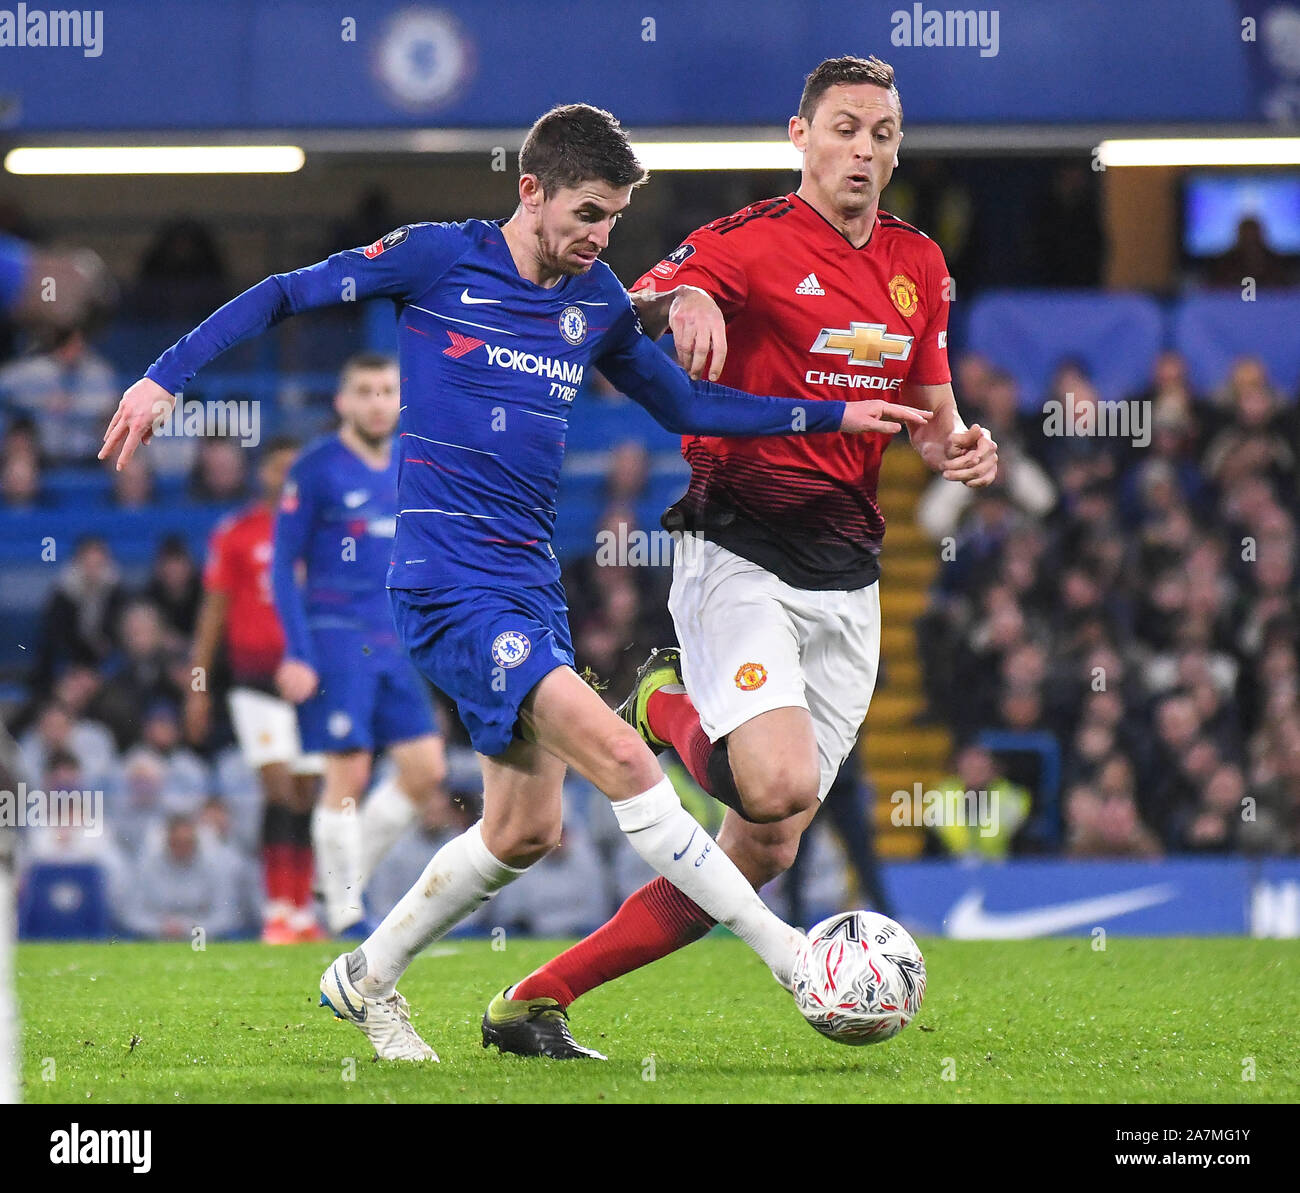 LONDON, ENGLAND - FEBRUARY 18, 2019: Jorge Luiz Frello Filho (Jorginho) of Chelsea and Nemanja Matic of Manchester pictured during the 2018/19 FA Cup Fifth Round game between Chelsea FC and Manchester United at Stamford Bridge. Stock Photo